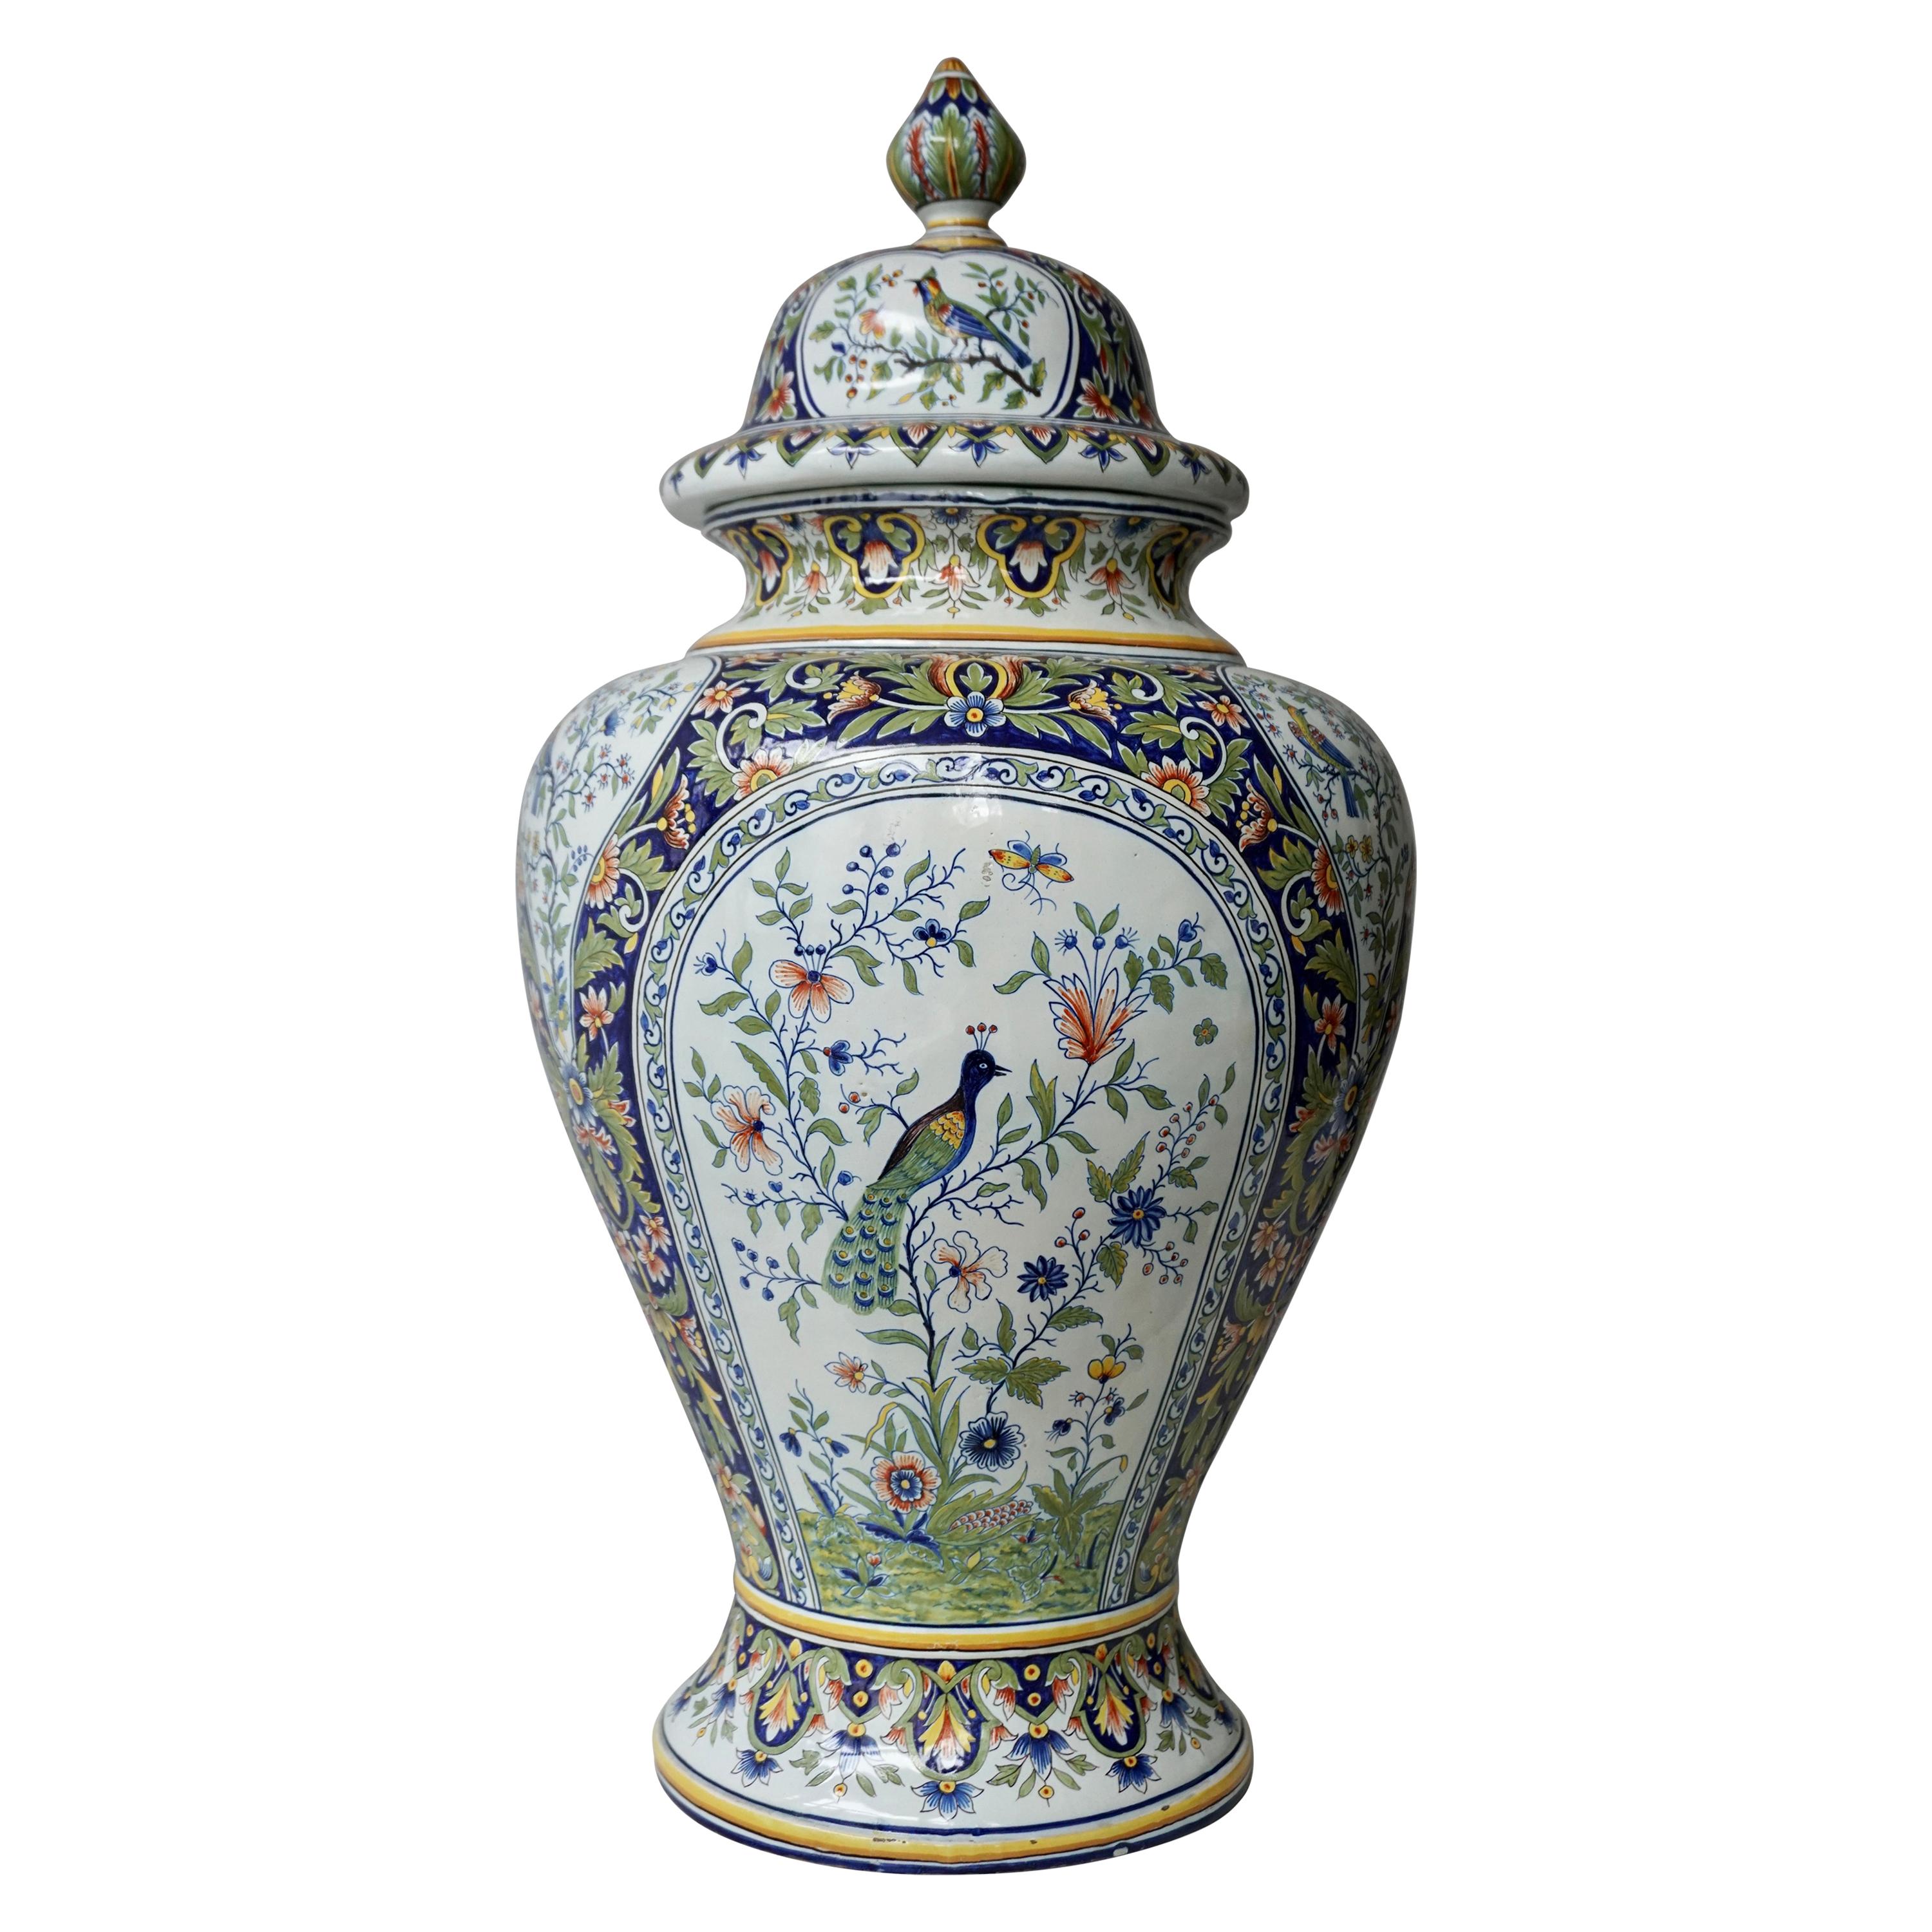 French Hand Painted Faience Urn or Vase with Flowers and Birds Motifs